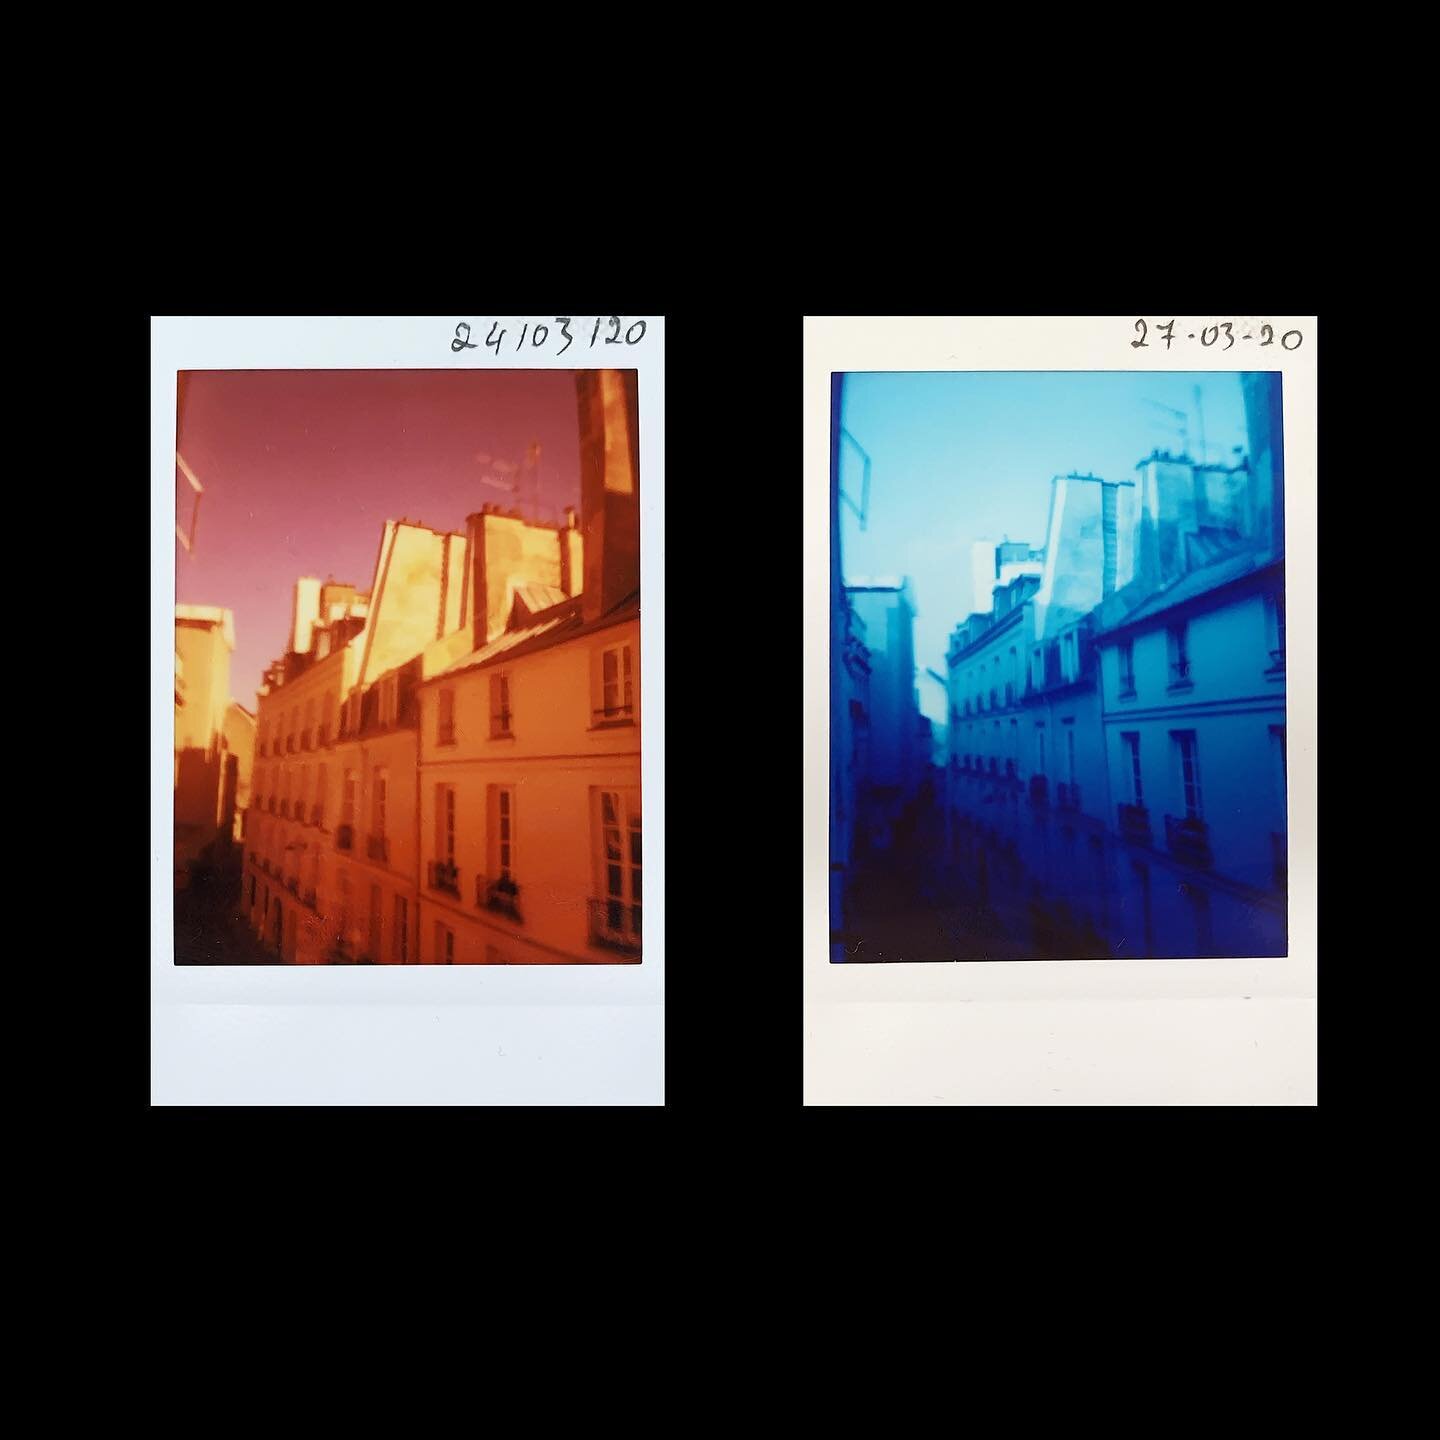 #confinement #paris #france #views #urban #polaroid #polaroids #photography #fujifilm #instax #photo #photos #pic #pics #picture #pictures #snapshot #art #picoftheday #photooftheday #color #exposure #travel #traveling #vacation #visiting #trip #myins